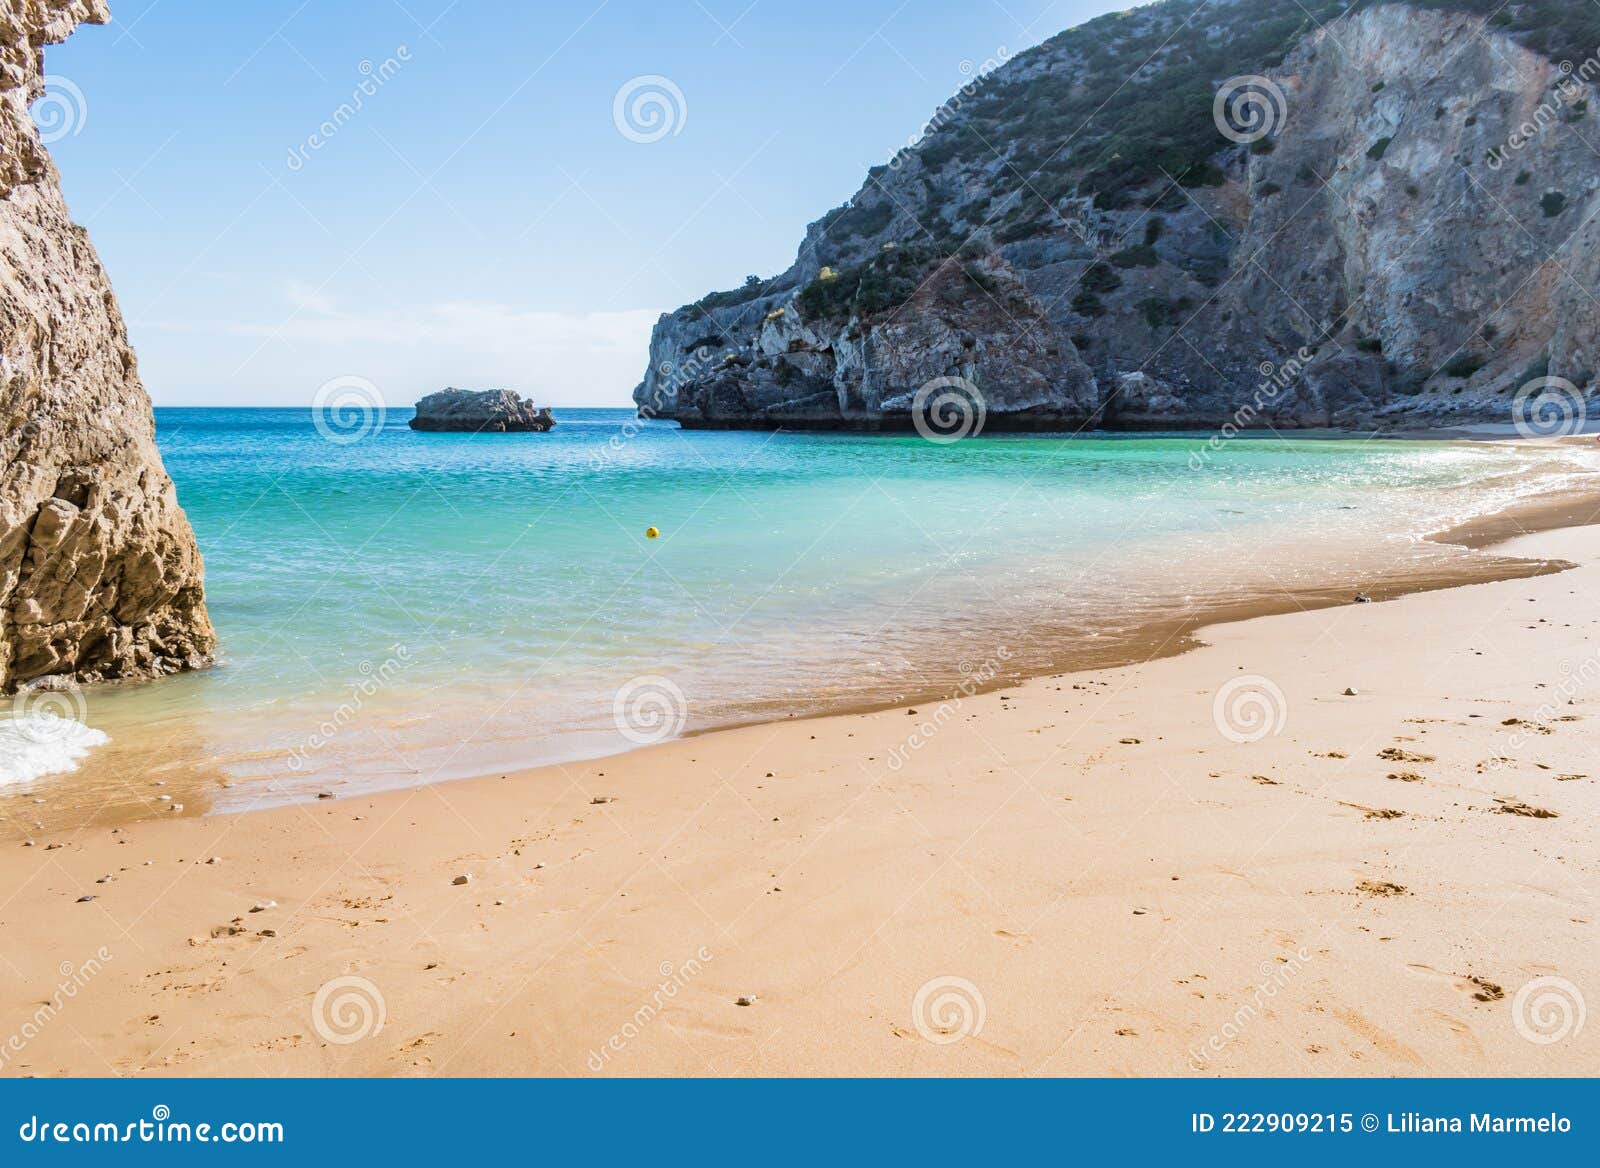 ribeiro do cavalo beach with clear turquoise water with rocks and a ball floating in the water, sesimbra portugal